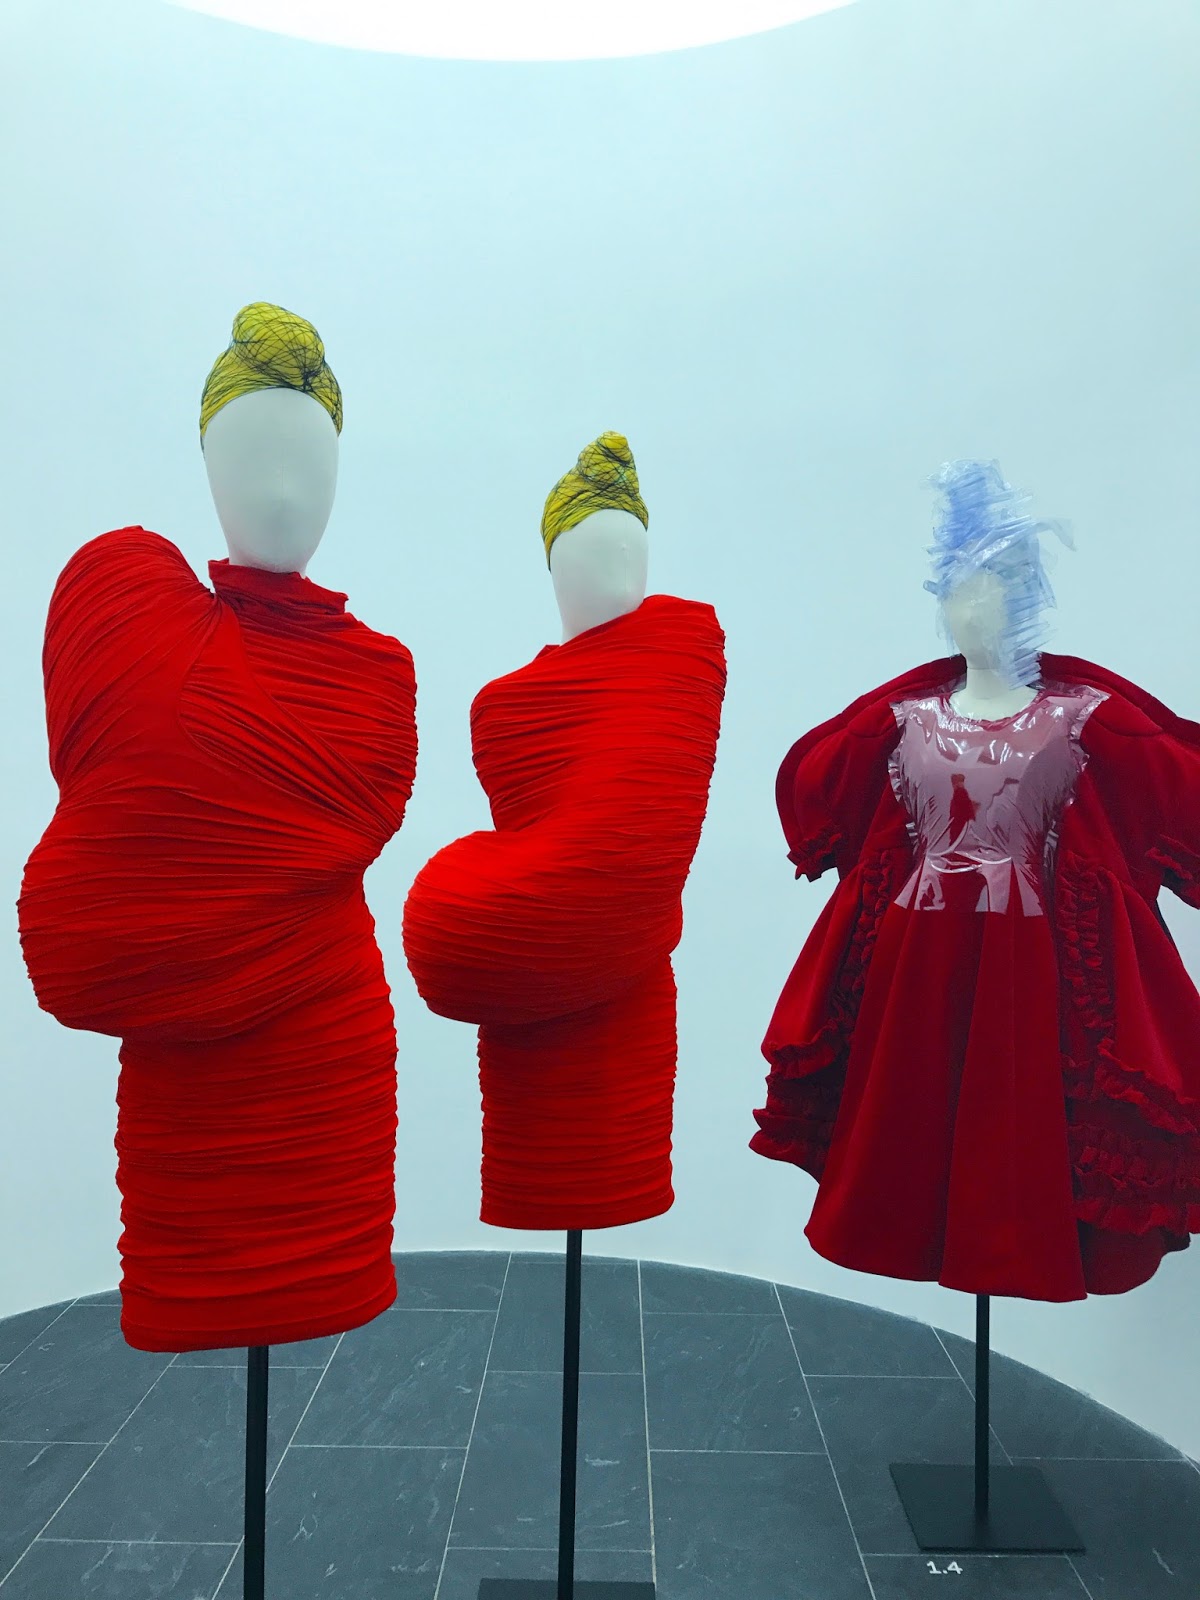 Sew Cute: Commes Des Garcon Exhibit Review + My FIRST TIME at the Met!